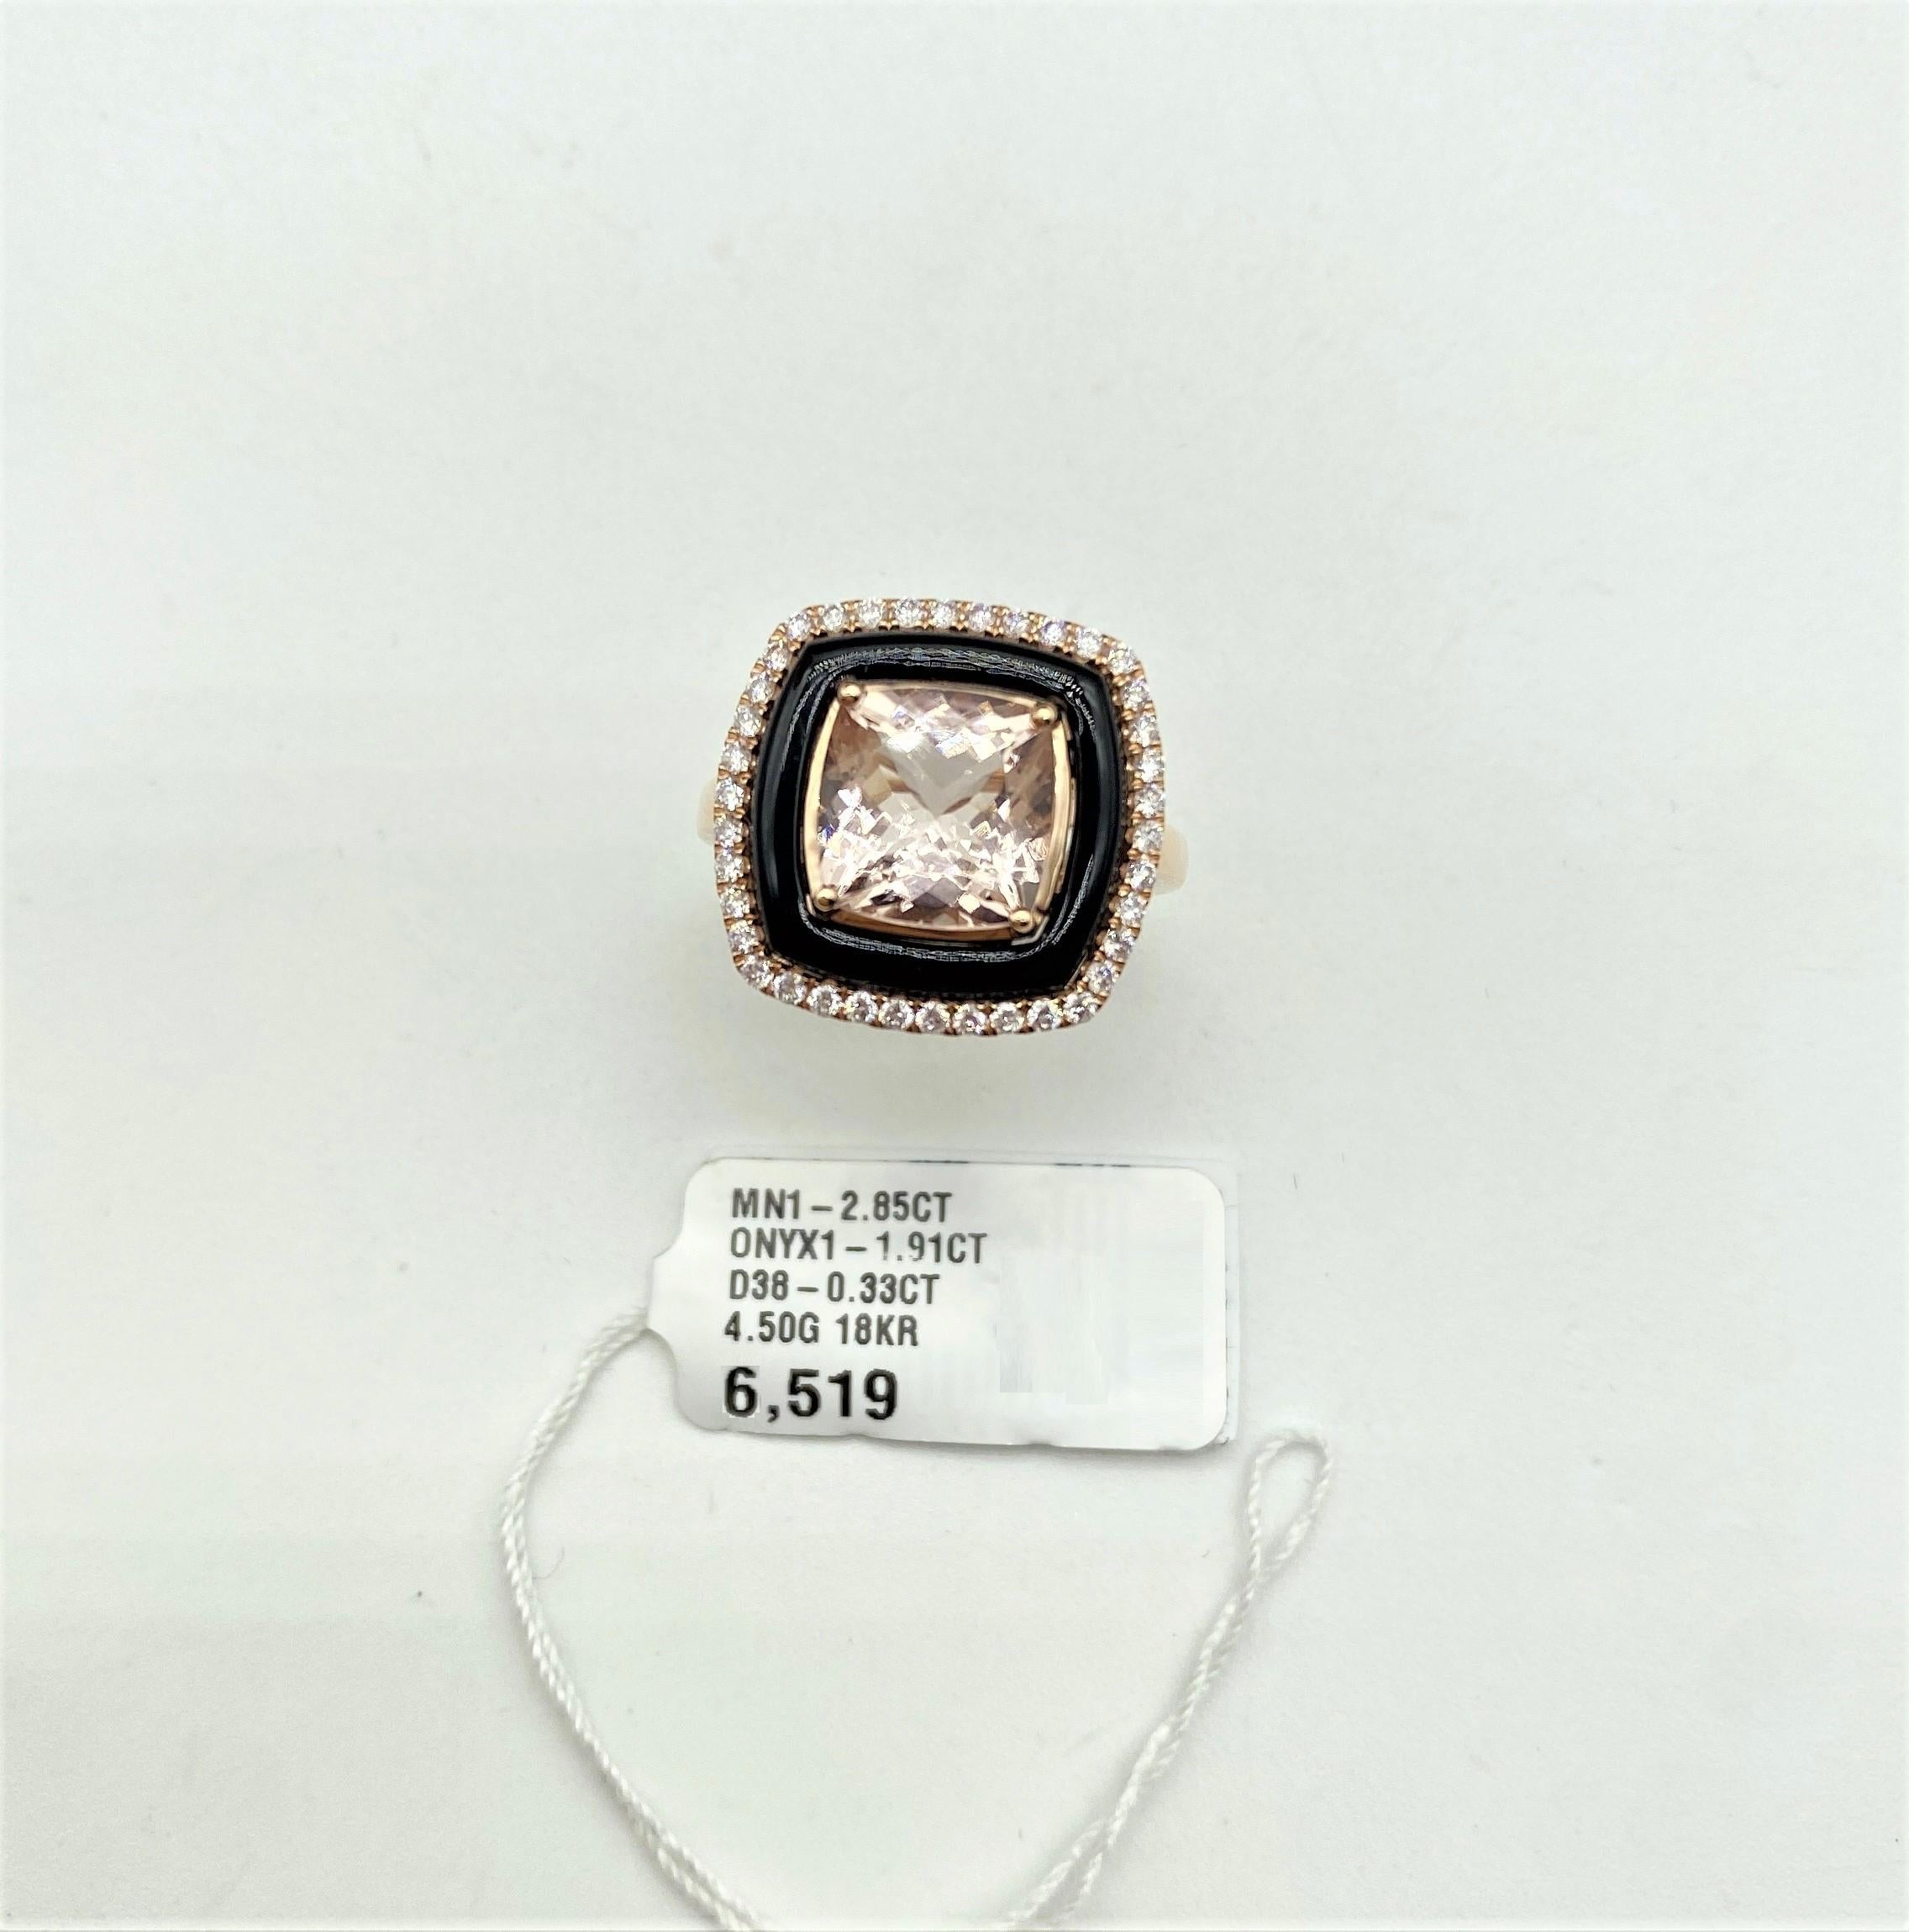 NWT $6, 519 18KT Fancy Large Glittering Fancy Morganite and Diamond Onyx Ring In New Condition For Sale In New York, NY